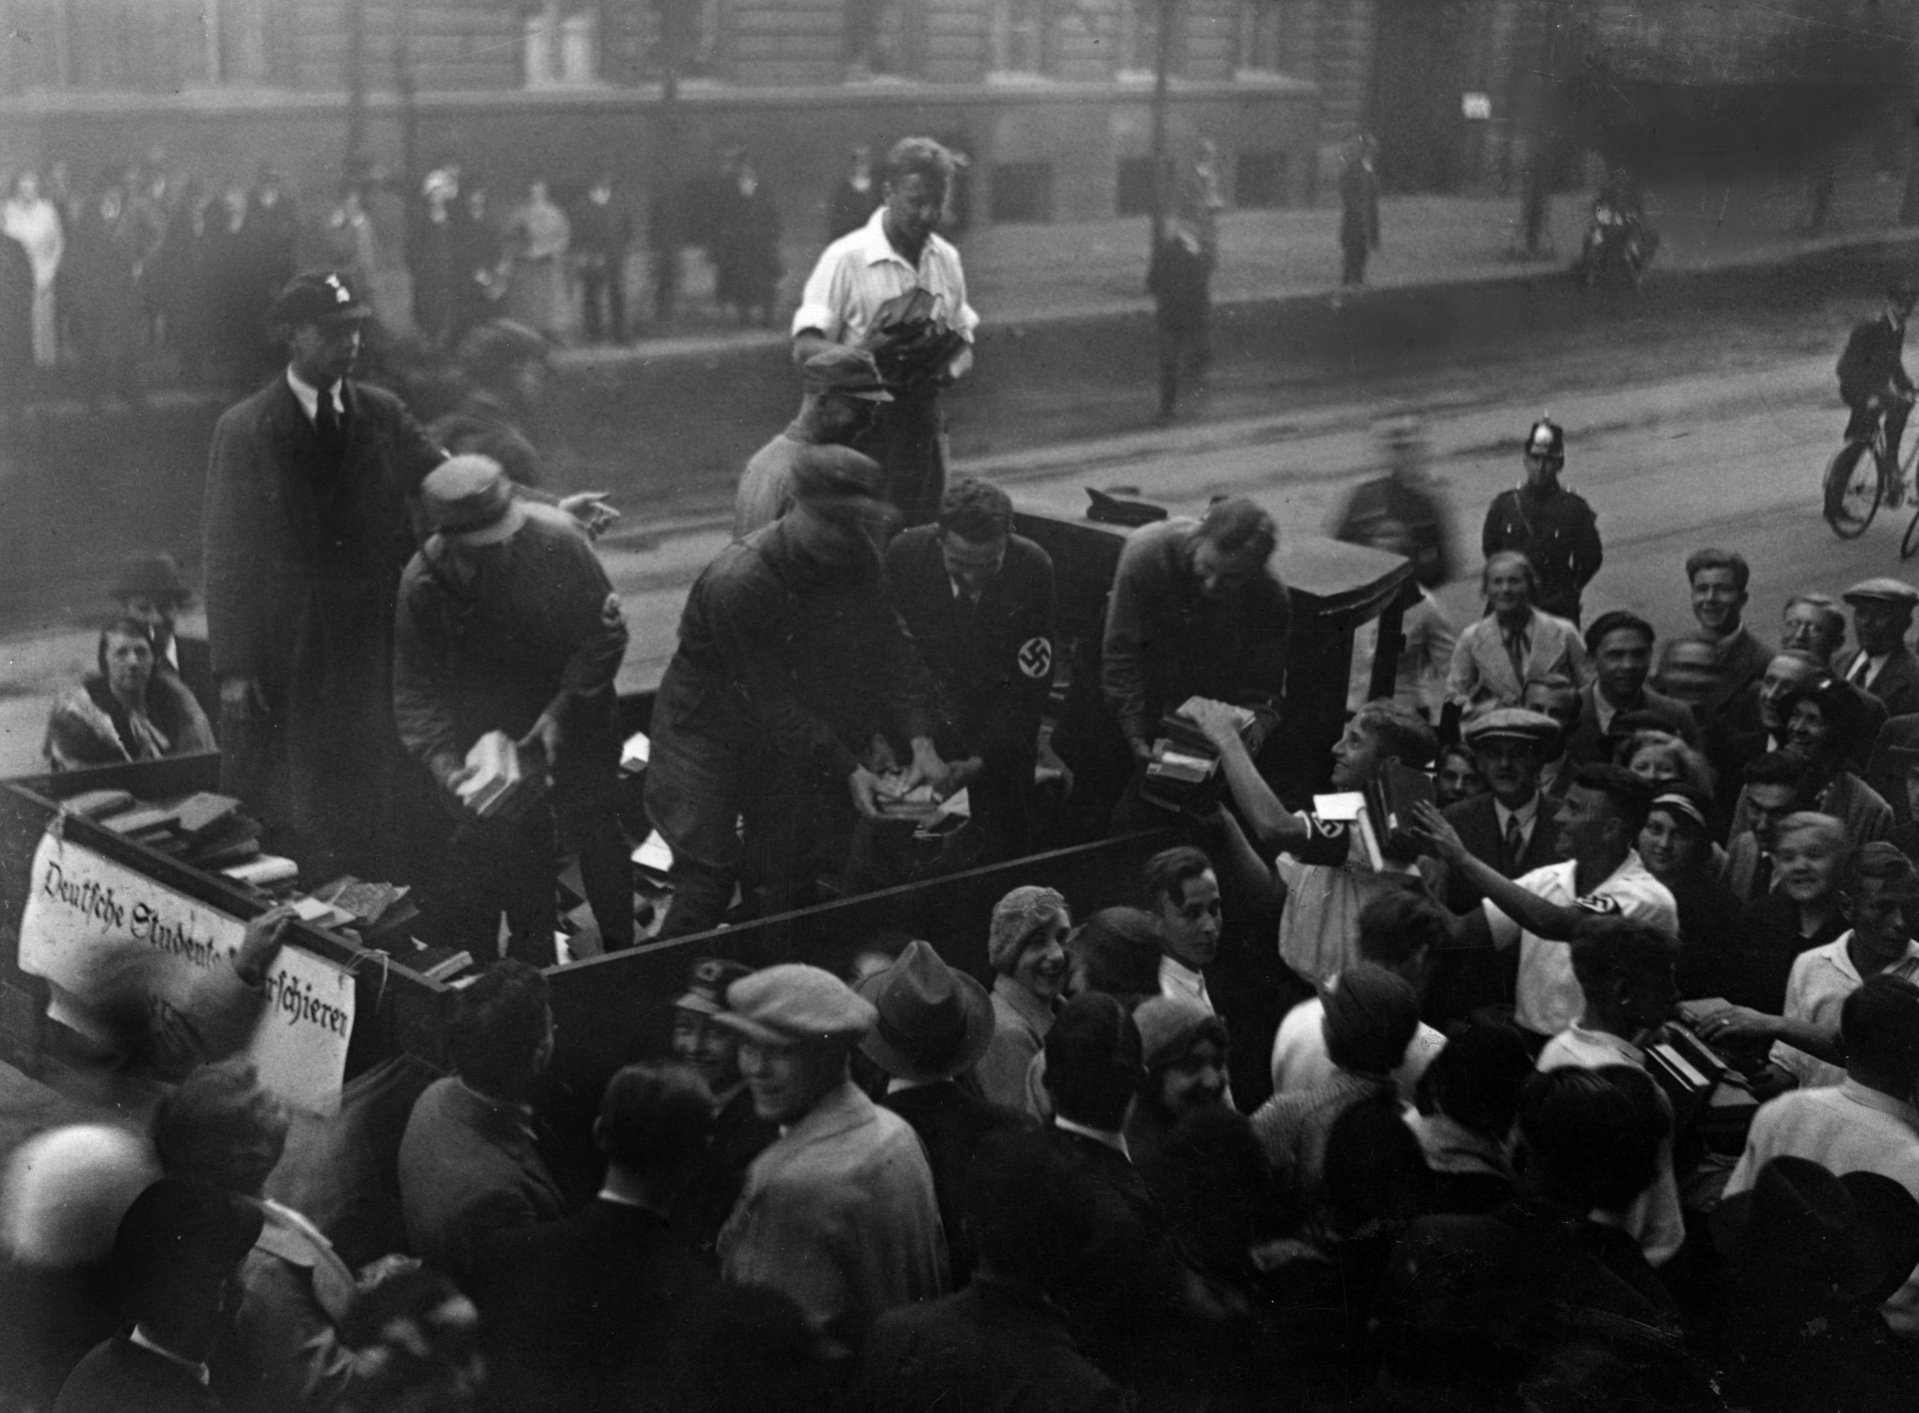  Pro-Nazi students are standing on the loading platform of a small open truck at the edge of the road and loading books brought by a crowd of people into it.